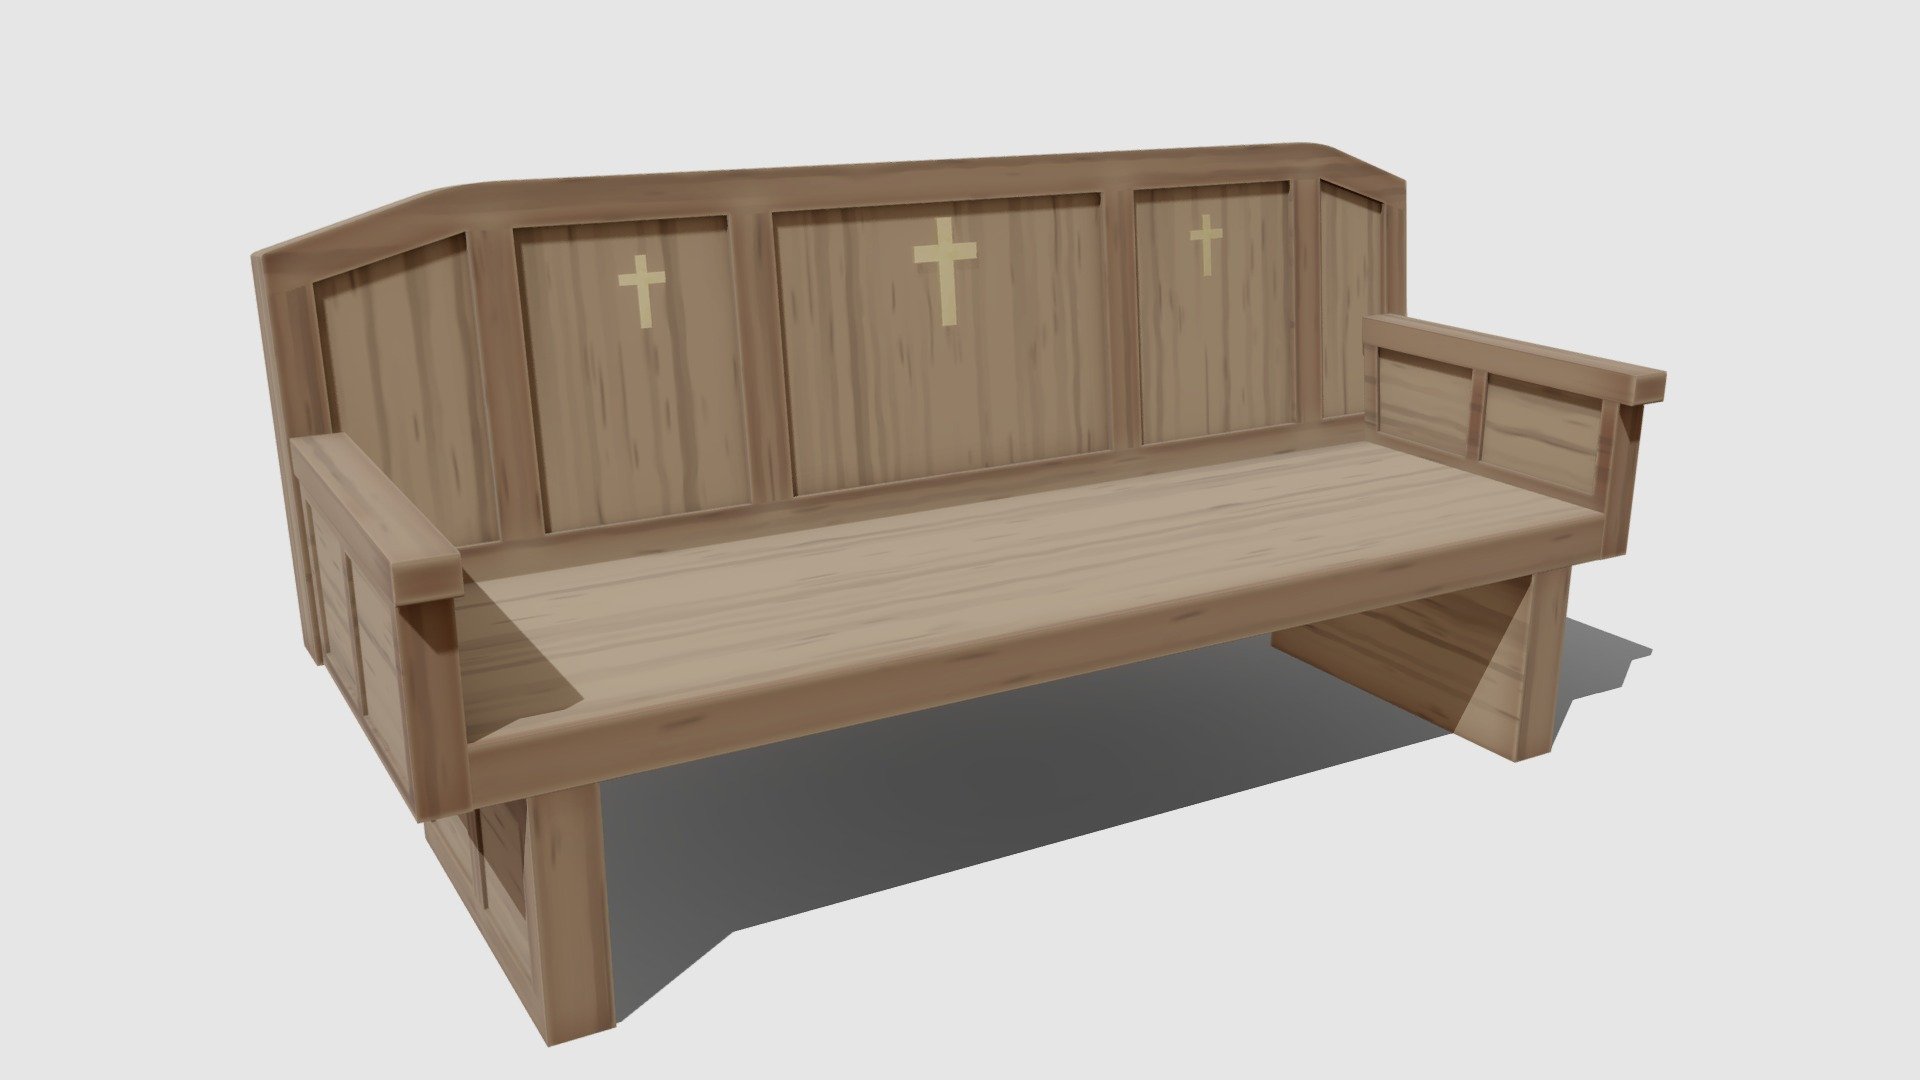 Low poly model of a church bench. Base 3D model made by Erik Larsson 3d model